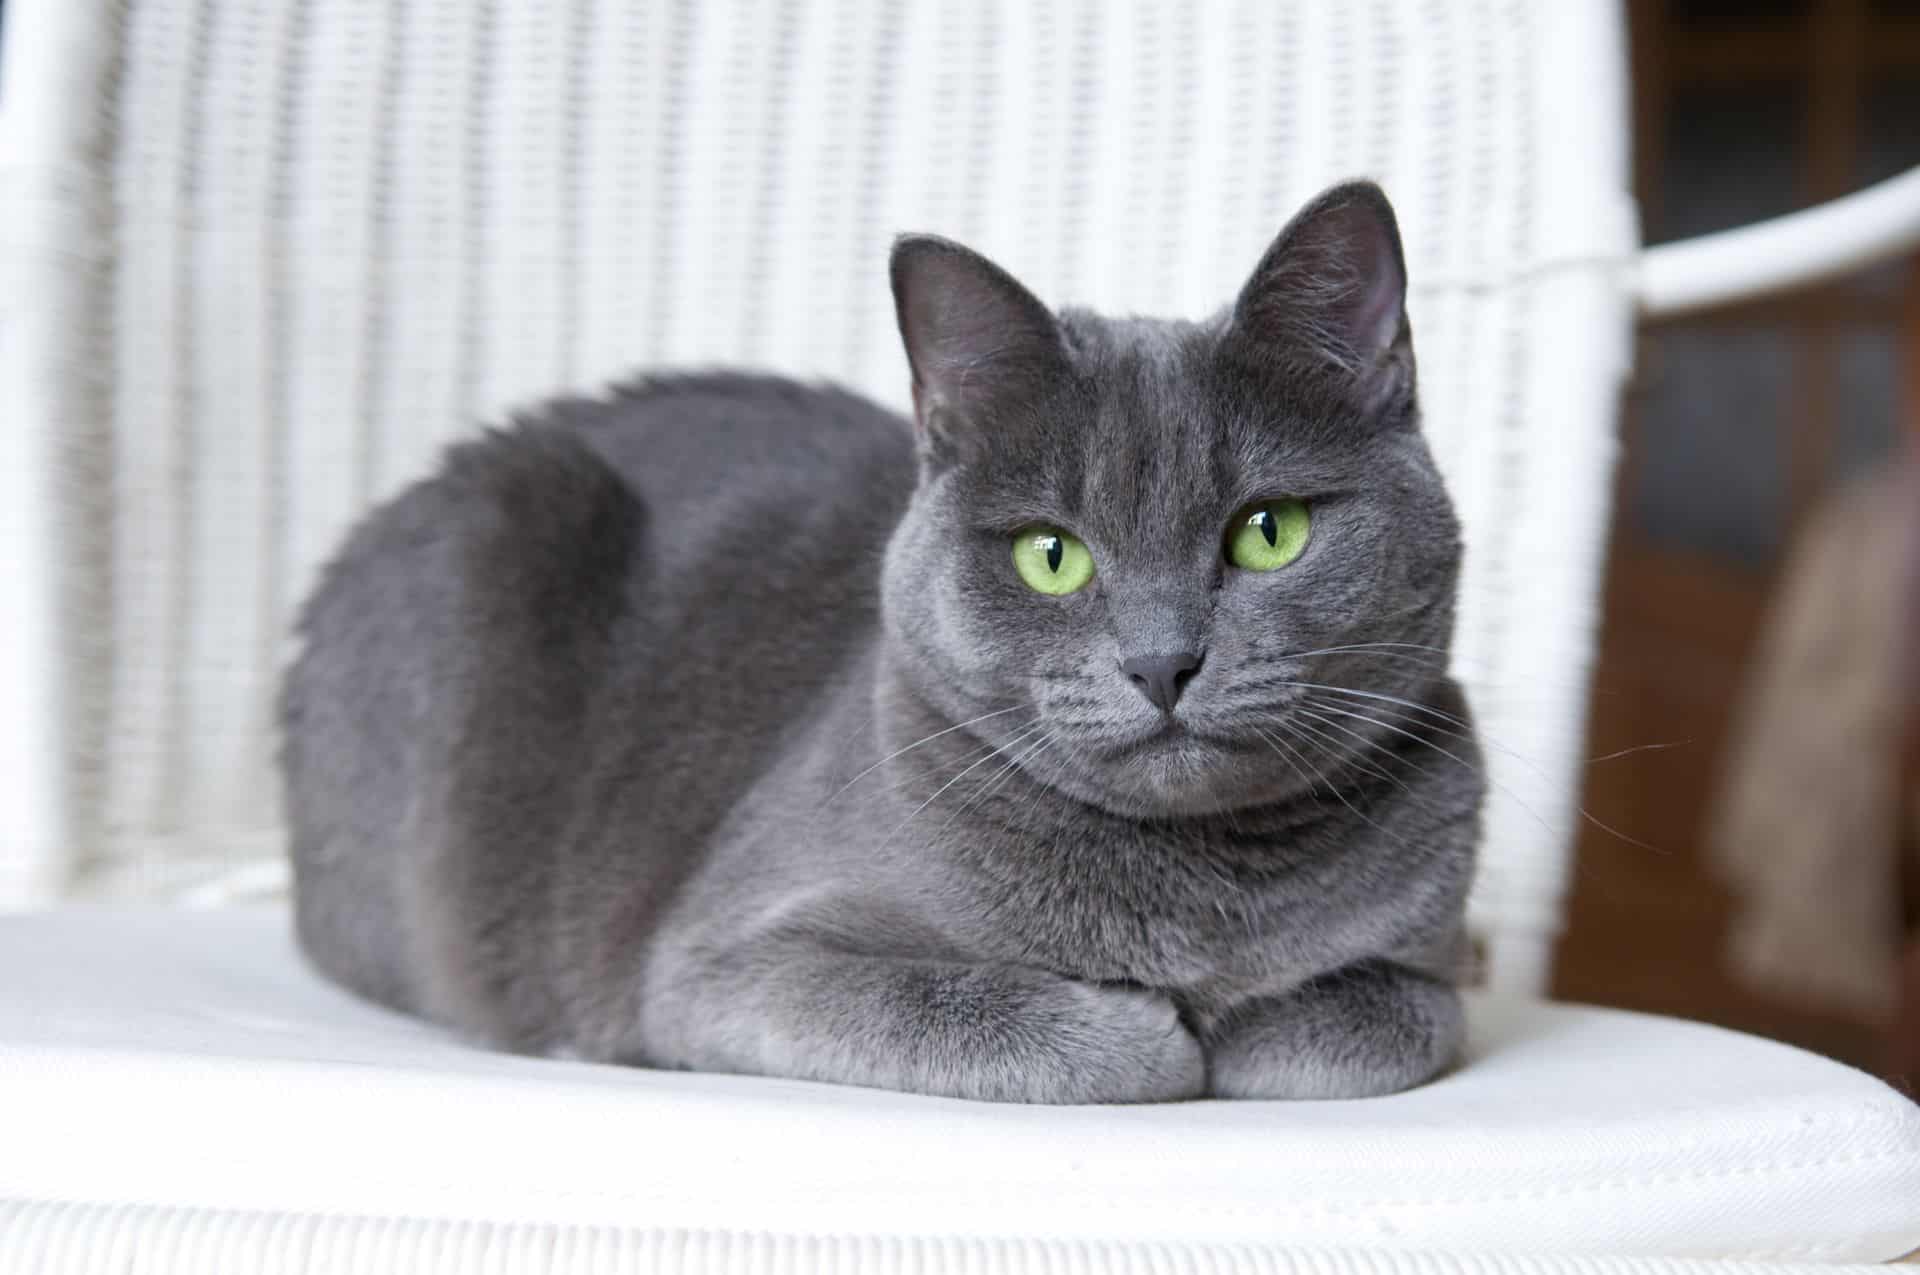 Russian Blues often have lower chances of getting sick.